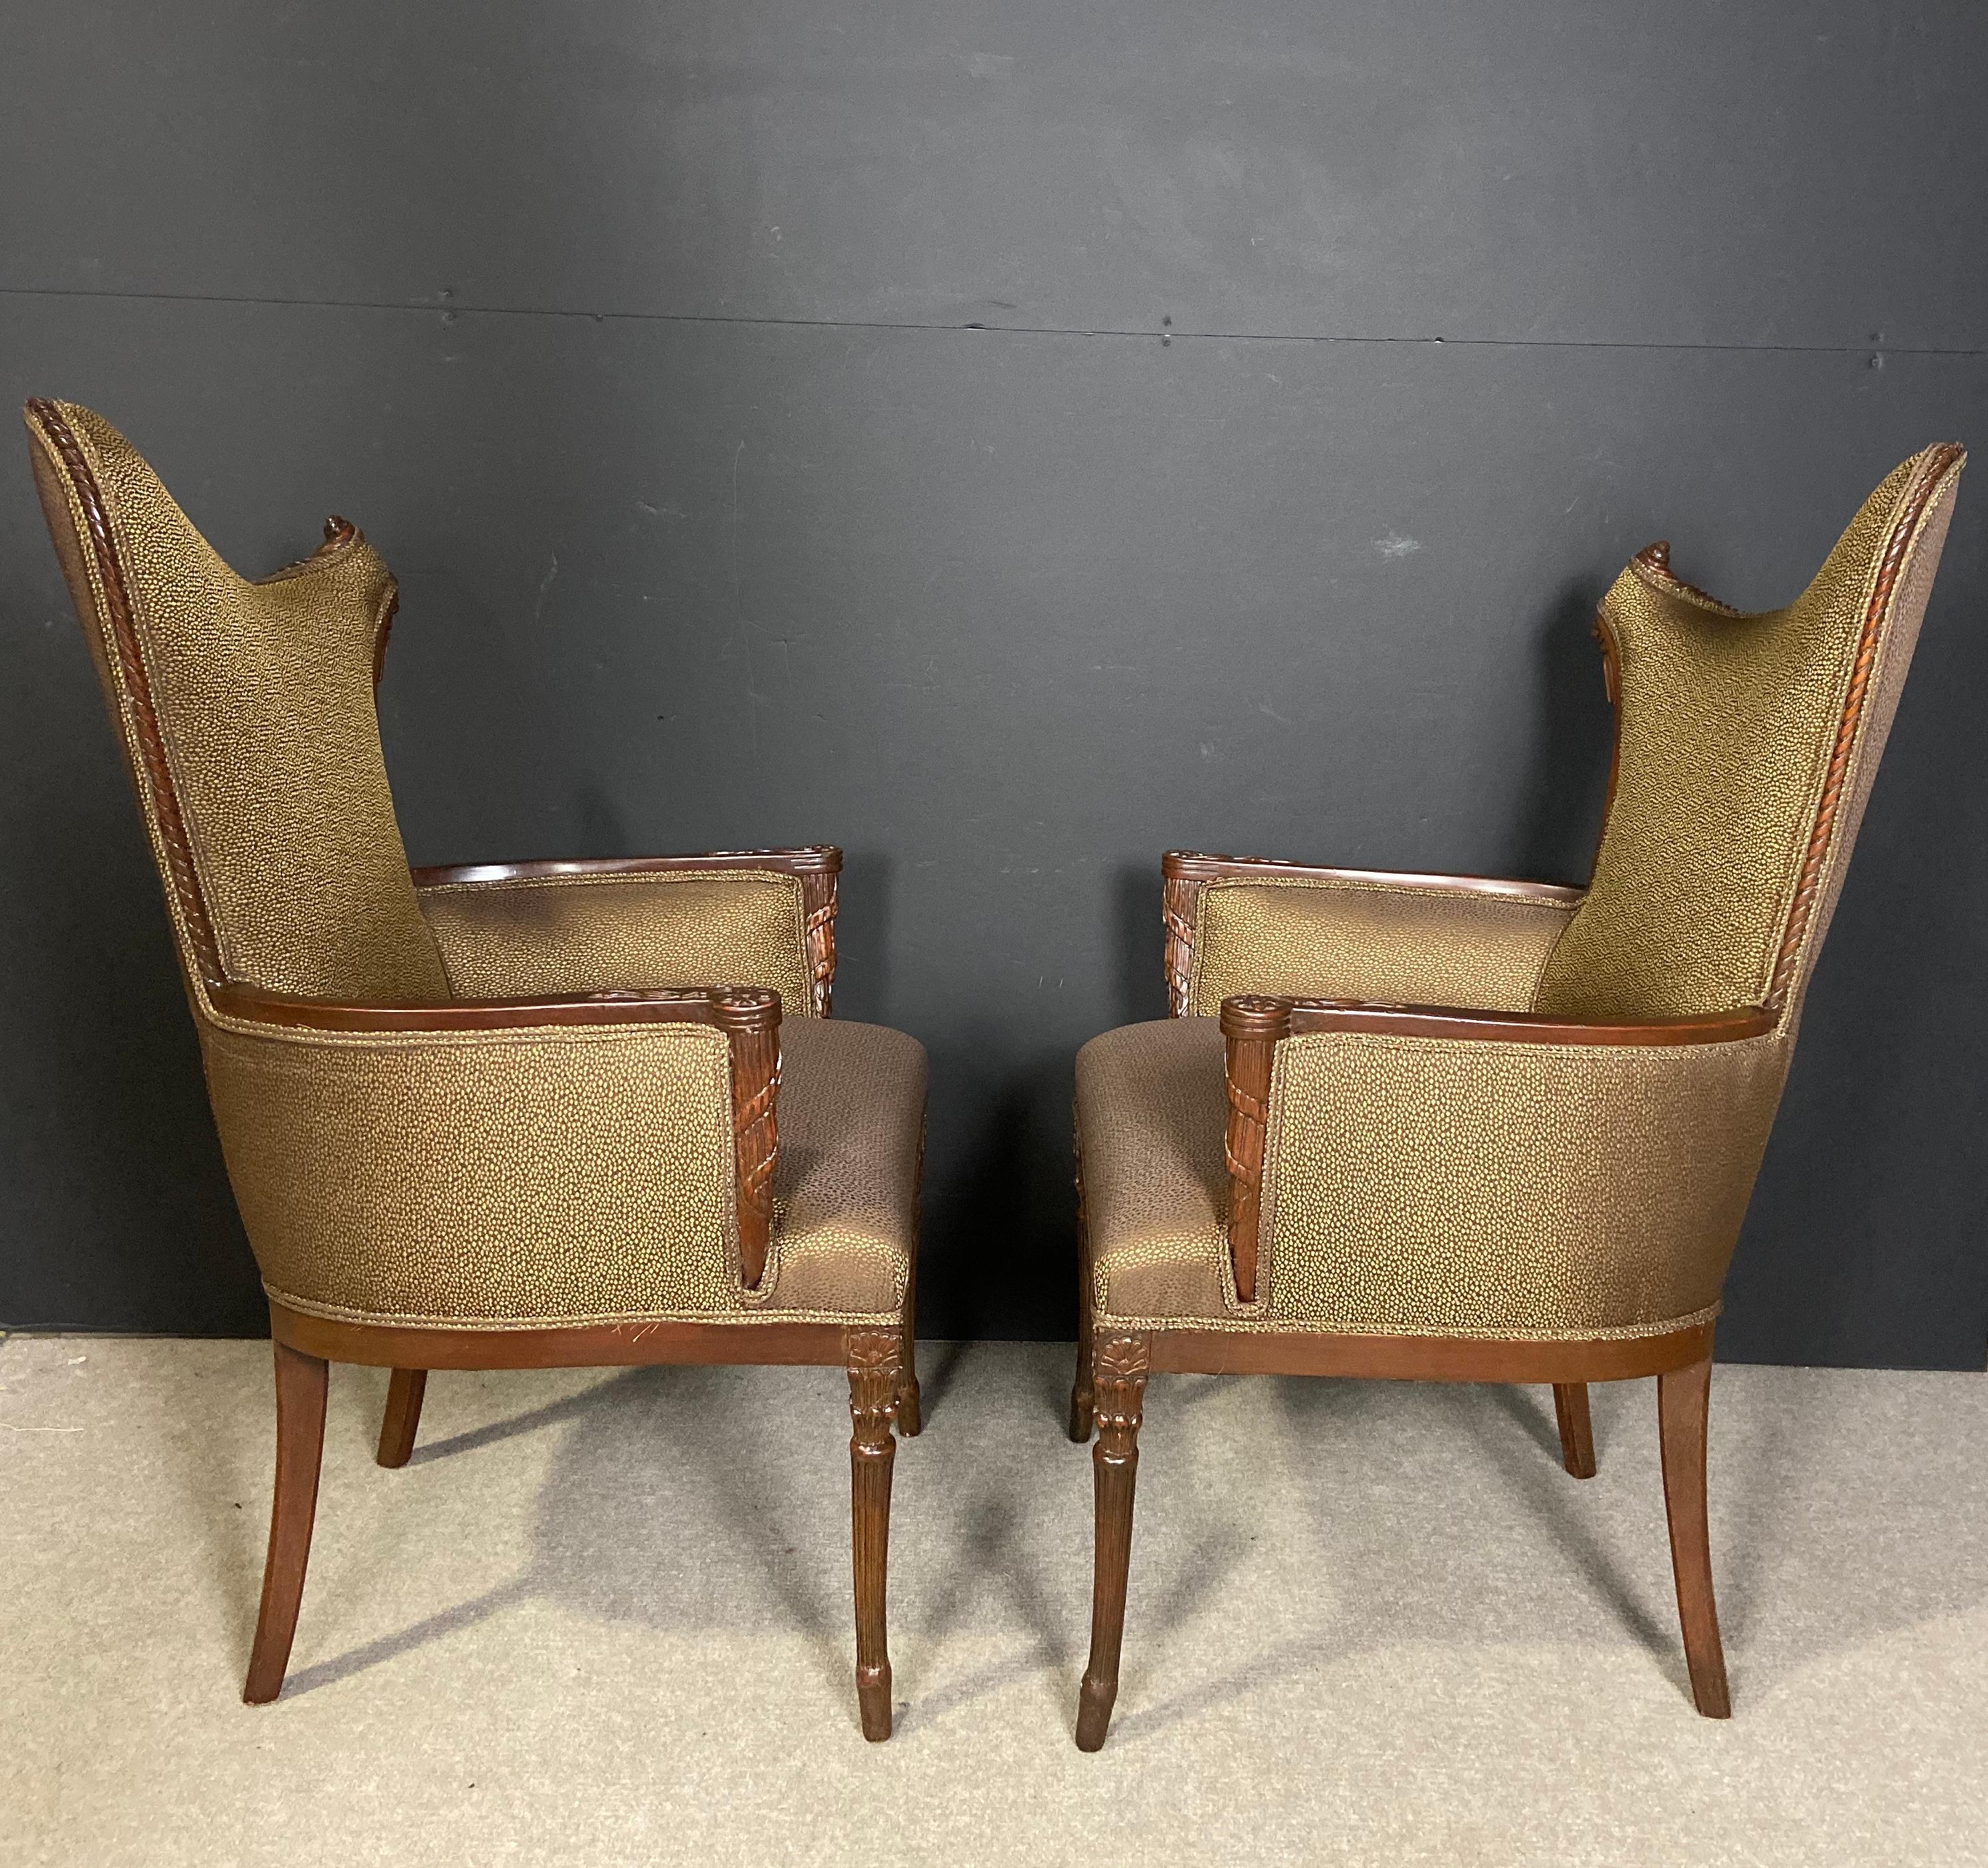 Pair of unusual form midcentury Hollywood Regency hand carved left and right opposing side chairs/armchairs. Upholstered in a wonderful gold and brown fabric.